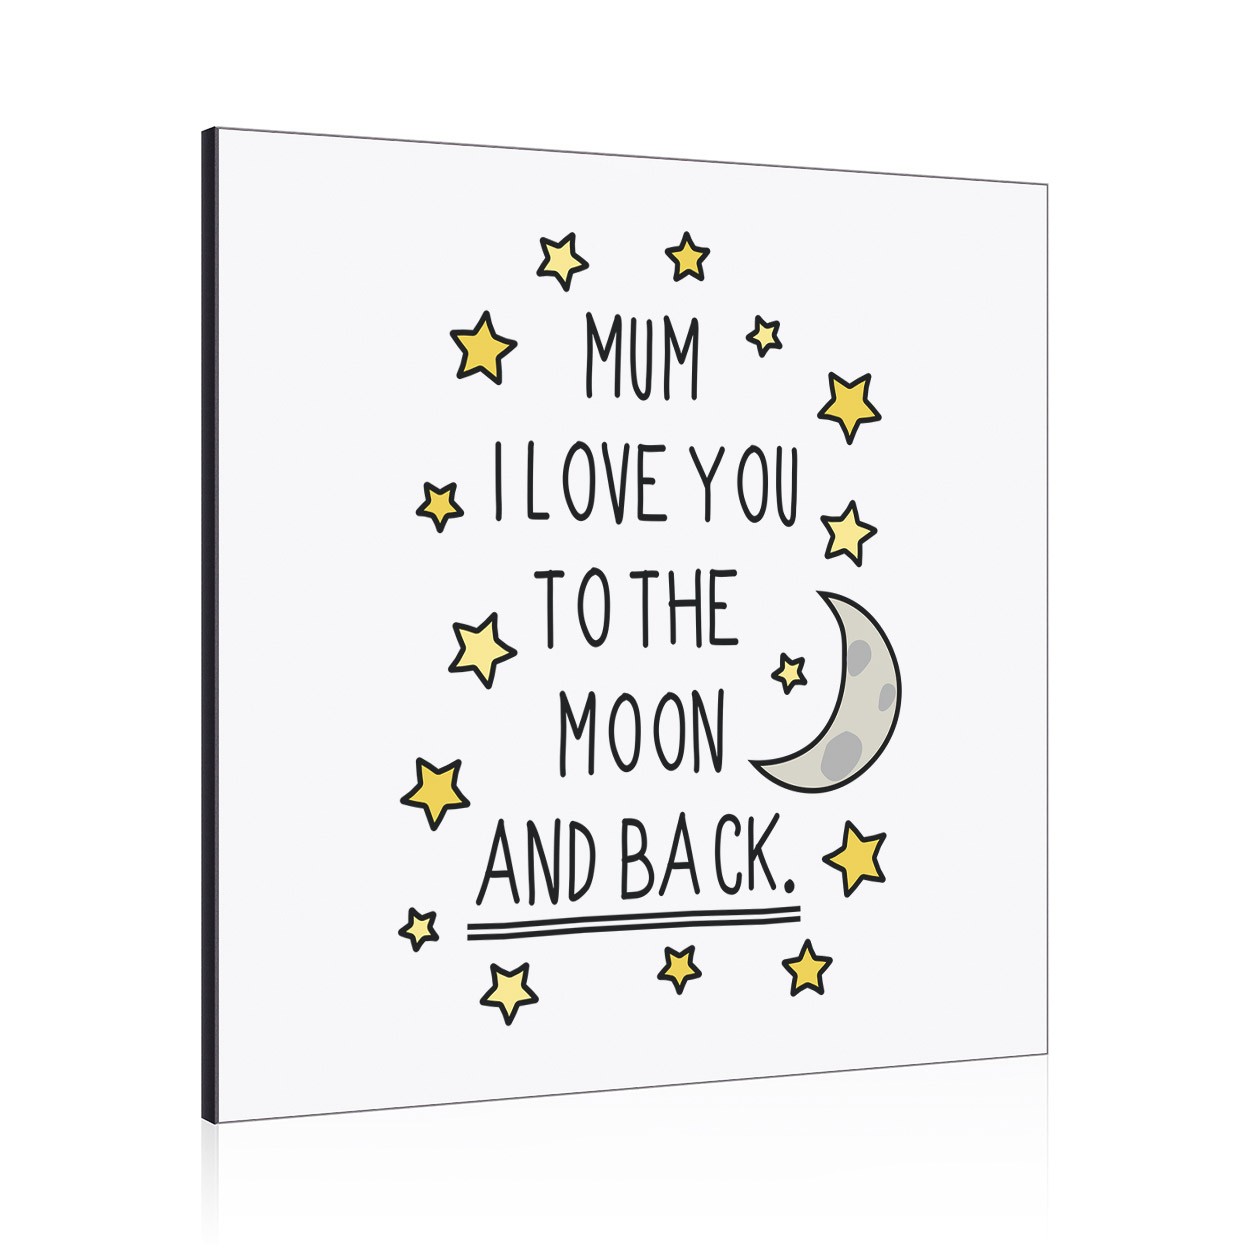 Mum I Love You To The Moon And Back Wall Art Panel